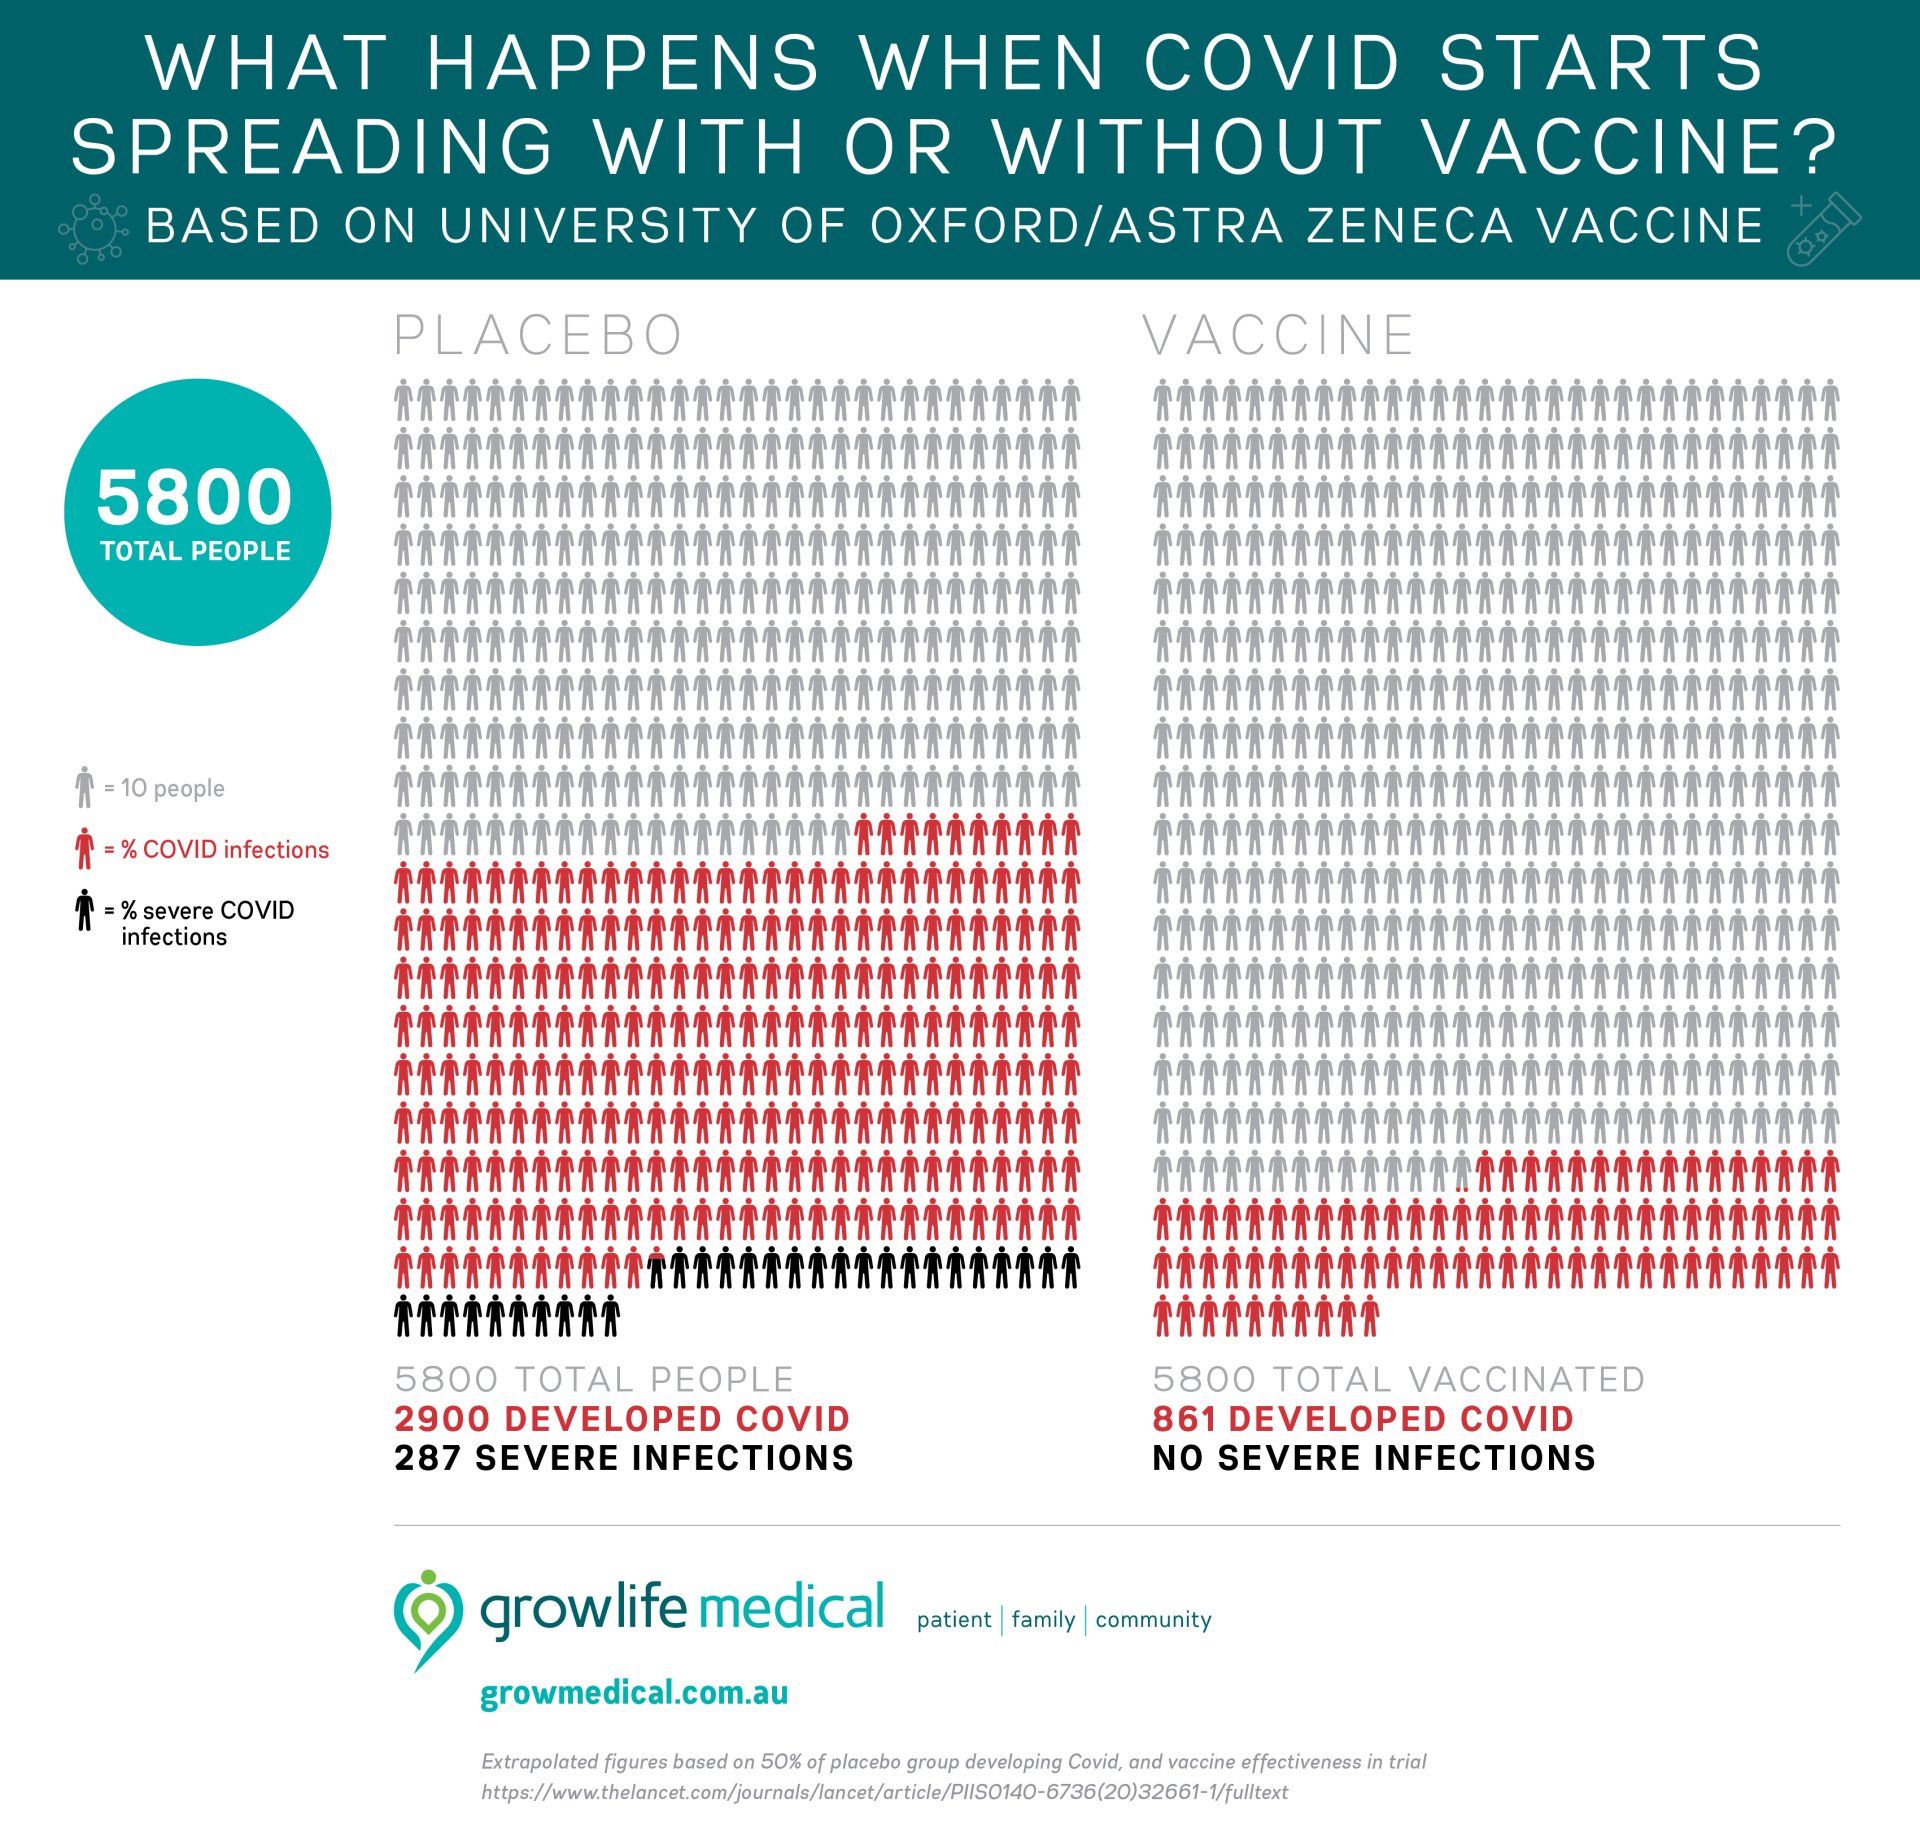 COVID Vaccination Brisbane | Growlife Medical | What If?